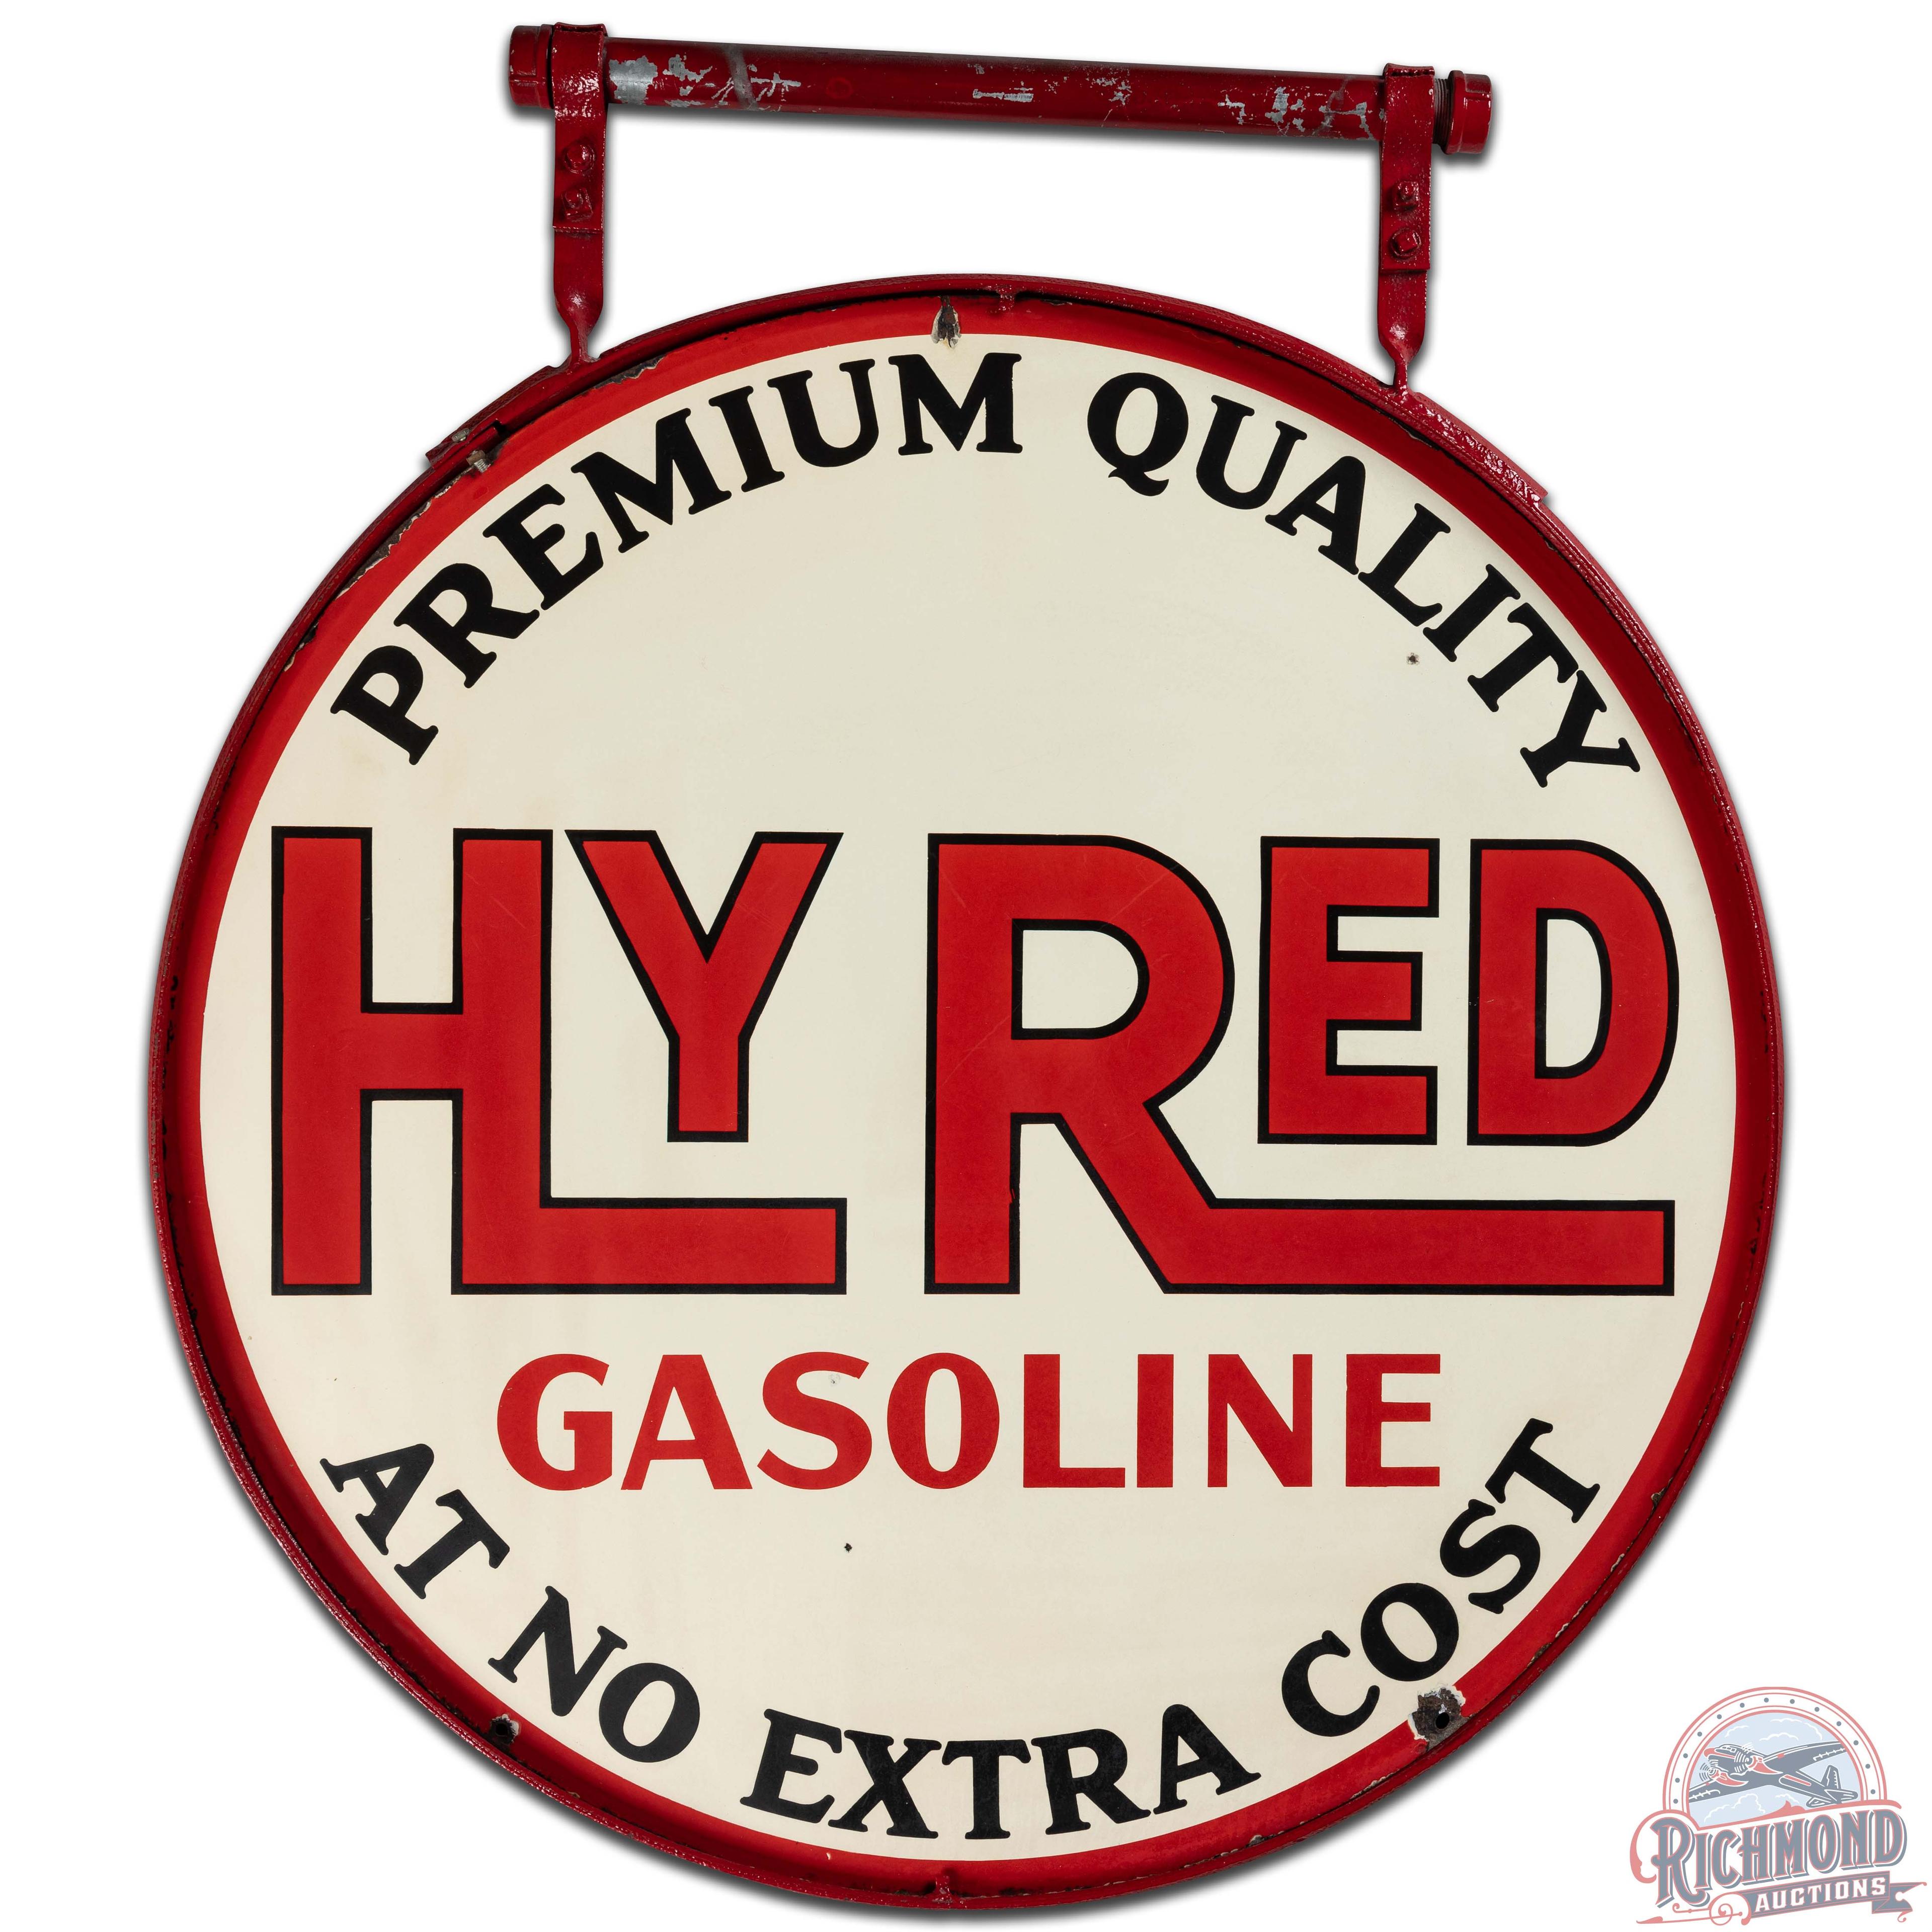 Scarce Hy Red Premium Quality Gasoline 42" DS Porcelain Sign w/ Ring